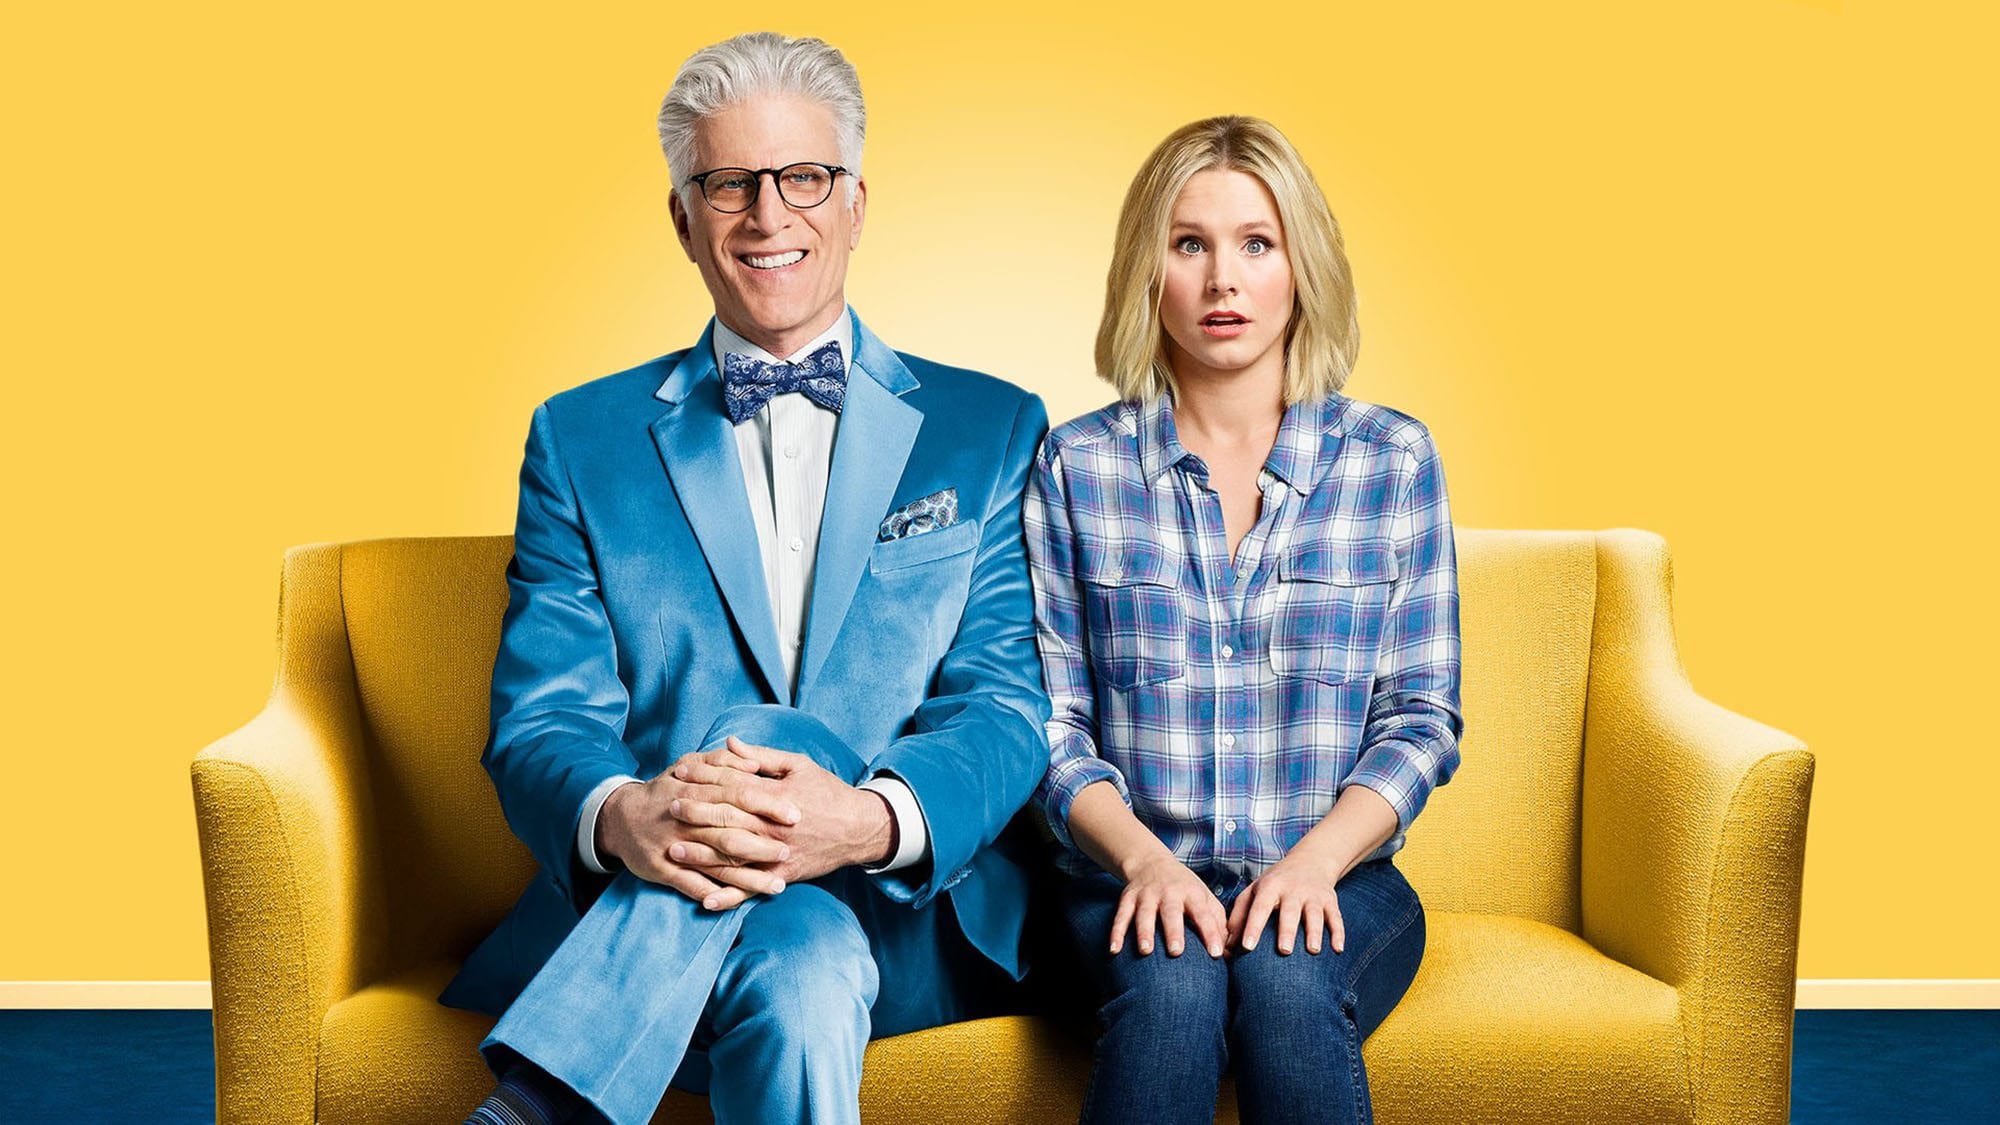 Michael Schur’s brilliantly subversive and whimsical laugh riot 'The Good Place' goes from strength to strength in its second season.